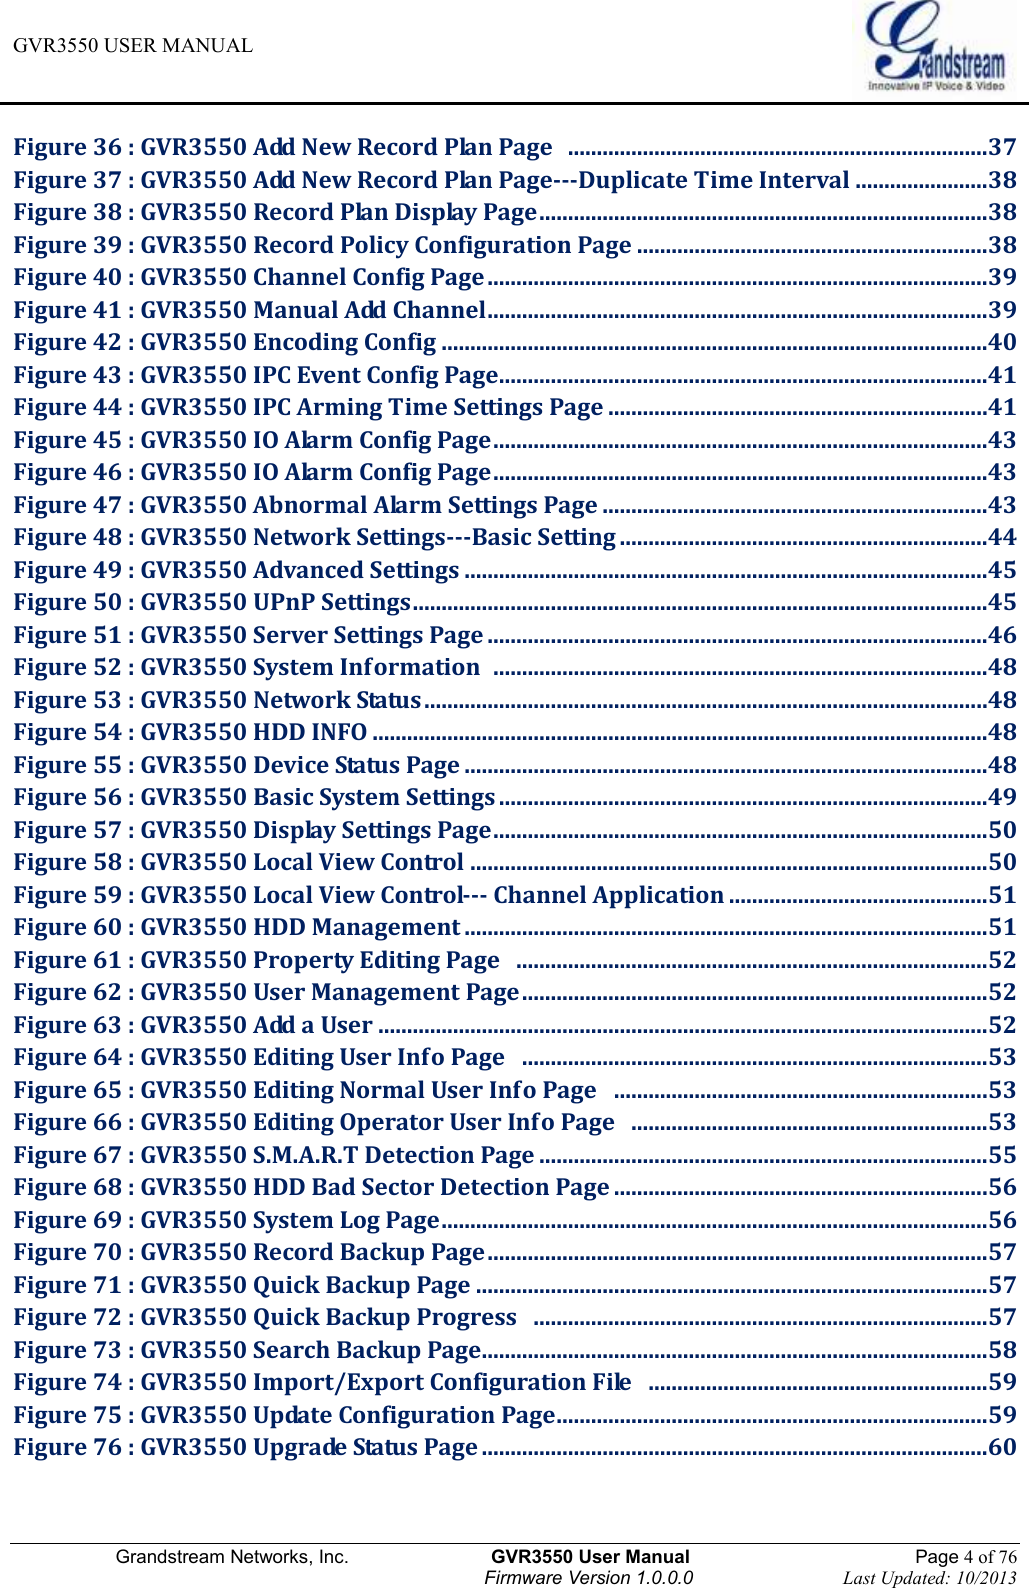 GVR3550 USER MANUAL   Grandstream Networks, Inc.                    GVR3550 User Manual                                                Page 4 of 76 Firmware Version 1.0.0.0                                Last Updated: 10/2013  Figure 36 : GVR3550 Add New Record Plan Page   .........................................................................37 Figure 37 : GVR3550 Add New Record Plan Page---Duplicate Time Interval .......................38 Figure 38 : GVR3550 Record Plan Display Page ..............................................................................38 Figure 39 : GVR3550 Record Policy Configuration Page .............................................................38 Figure 40 : GVR3550 Channel Config Page .......................................................................................39 Figure 41 : GVR3550 Manual Add Channel .......................................................................................39 Figure 42 : GVR3550 Encoding Config ...............................................................................................40 Figure 43 : GVR3550 IPC Event Config Page .....................................................................................41 Figure 44 : GVR3550 IPC Arming Time Settings Page ..................................................................41 Figure 45 : GVR3550 IO Alarm Config Page ......................................................................................43 Figure 46 : GVR3550 IO Alarm Config Page ......................................................................................43 Figure 47 : GVR3550 Abnormal Alarm Settings Page ...................................................................43 Figure 48 : GVR3550 Network Settings---Basic Setting ................................................................44 Figure 49 : GVR3550 Advanced Settings ...........................................................................................45 Figure 50 : GVR3550 UPnP Settings ....................................................................................................45 Figure 51 : GVR3550 Server Settings Page .......................................................................................46 Figure 52 : GVR3550 System Information  ......................................................................................48 Figure 53 : GVR3550 Network Status ..................................................................................................48 Figure 54 : GVR3550 HDD INFO ...........................................................................................................48 Figure 55 : GVR3550 Device Status Page ...........................................................................................48 Figure 56 : GVR3550 Basic System Settings .....................................................................................49 Figure 57 : GVR3550 Display Settings Page ......................................................................................50 Figure 58 : GVR3550 Local View Control ..........................................................................................50 Figure 59 : GVR3550 Local View Control--- Channel Application .............................................51 Figure 60 : GVR3550 HDD Management ...........................................................................................51 Figure 61 : GVR3550 Property Editing Page   ..................................................................................52 Figure 62 : GVR3550 User Management Page .................................................................................52 Figure 63 : GVR3550 Add a User ..........................................................................................................52 Figure 64 : GVR3550 Editing User Info Page   .................................................................................53 Figure 65 : GVR3550 Editing Normal User Info Page   .................................................................53 Figure 66 : GVR3550 Editing Operator User Info Page   ..............................................................53 Figure 67 : GVR3550 S.M.A.R.T Detection Page ..............................................................................55 Figure 68 : GVR3550 HDD Bad Sector Detection Page .................................................................56 Figure 69 : GVR3550 System Log Page ...............................................................................................56 Figure 70 : GVR3550 Record Backup Page .......................................................................................57 Figure 71 : GVR3550 Quick Backup Page .........................................................................................57 Figure 72 : GVR3550 Quick Backup Progress   ...............................................................................57 Figure 73 : GVR3550 Search Backup Page ........................................................................................58 Figure 74 : GVR3550 Import/Export Configuration File   ...........................................................59 Figure 75 : GVR3550 Update Configuration Page ...........................................................................59 Figure 76 : GVR3550 Upgrade Status Page ........................................................................................60 